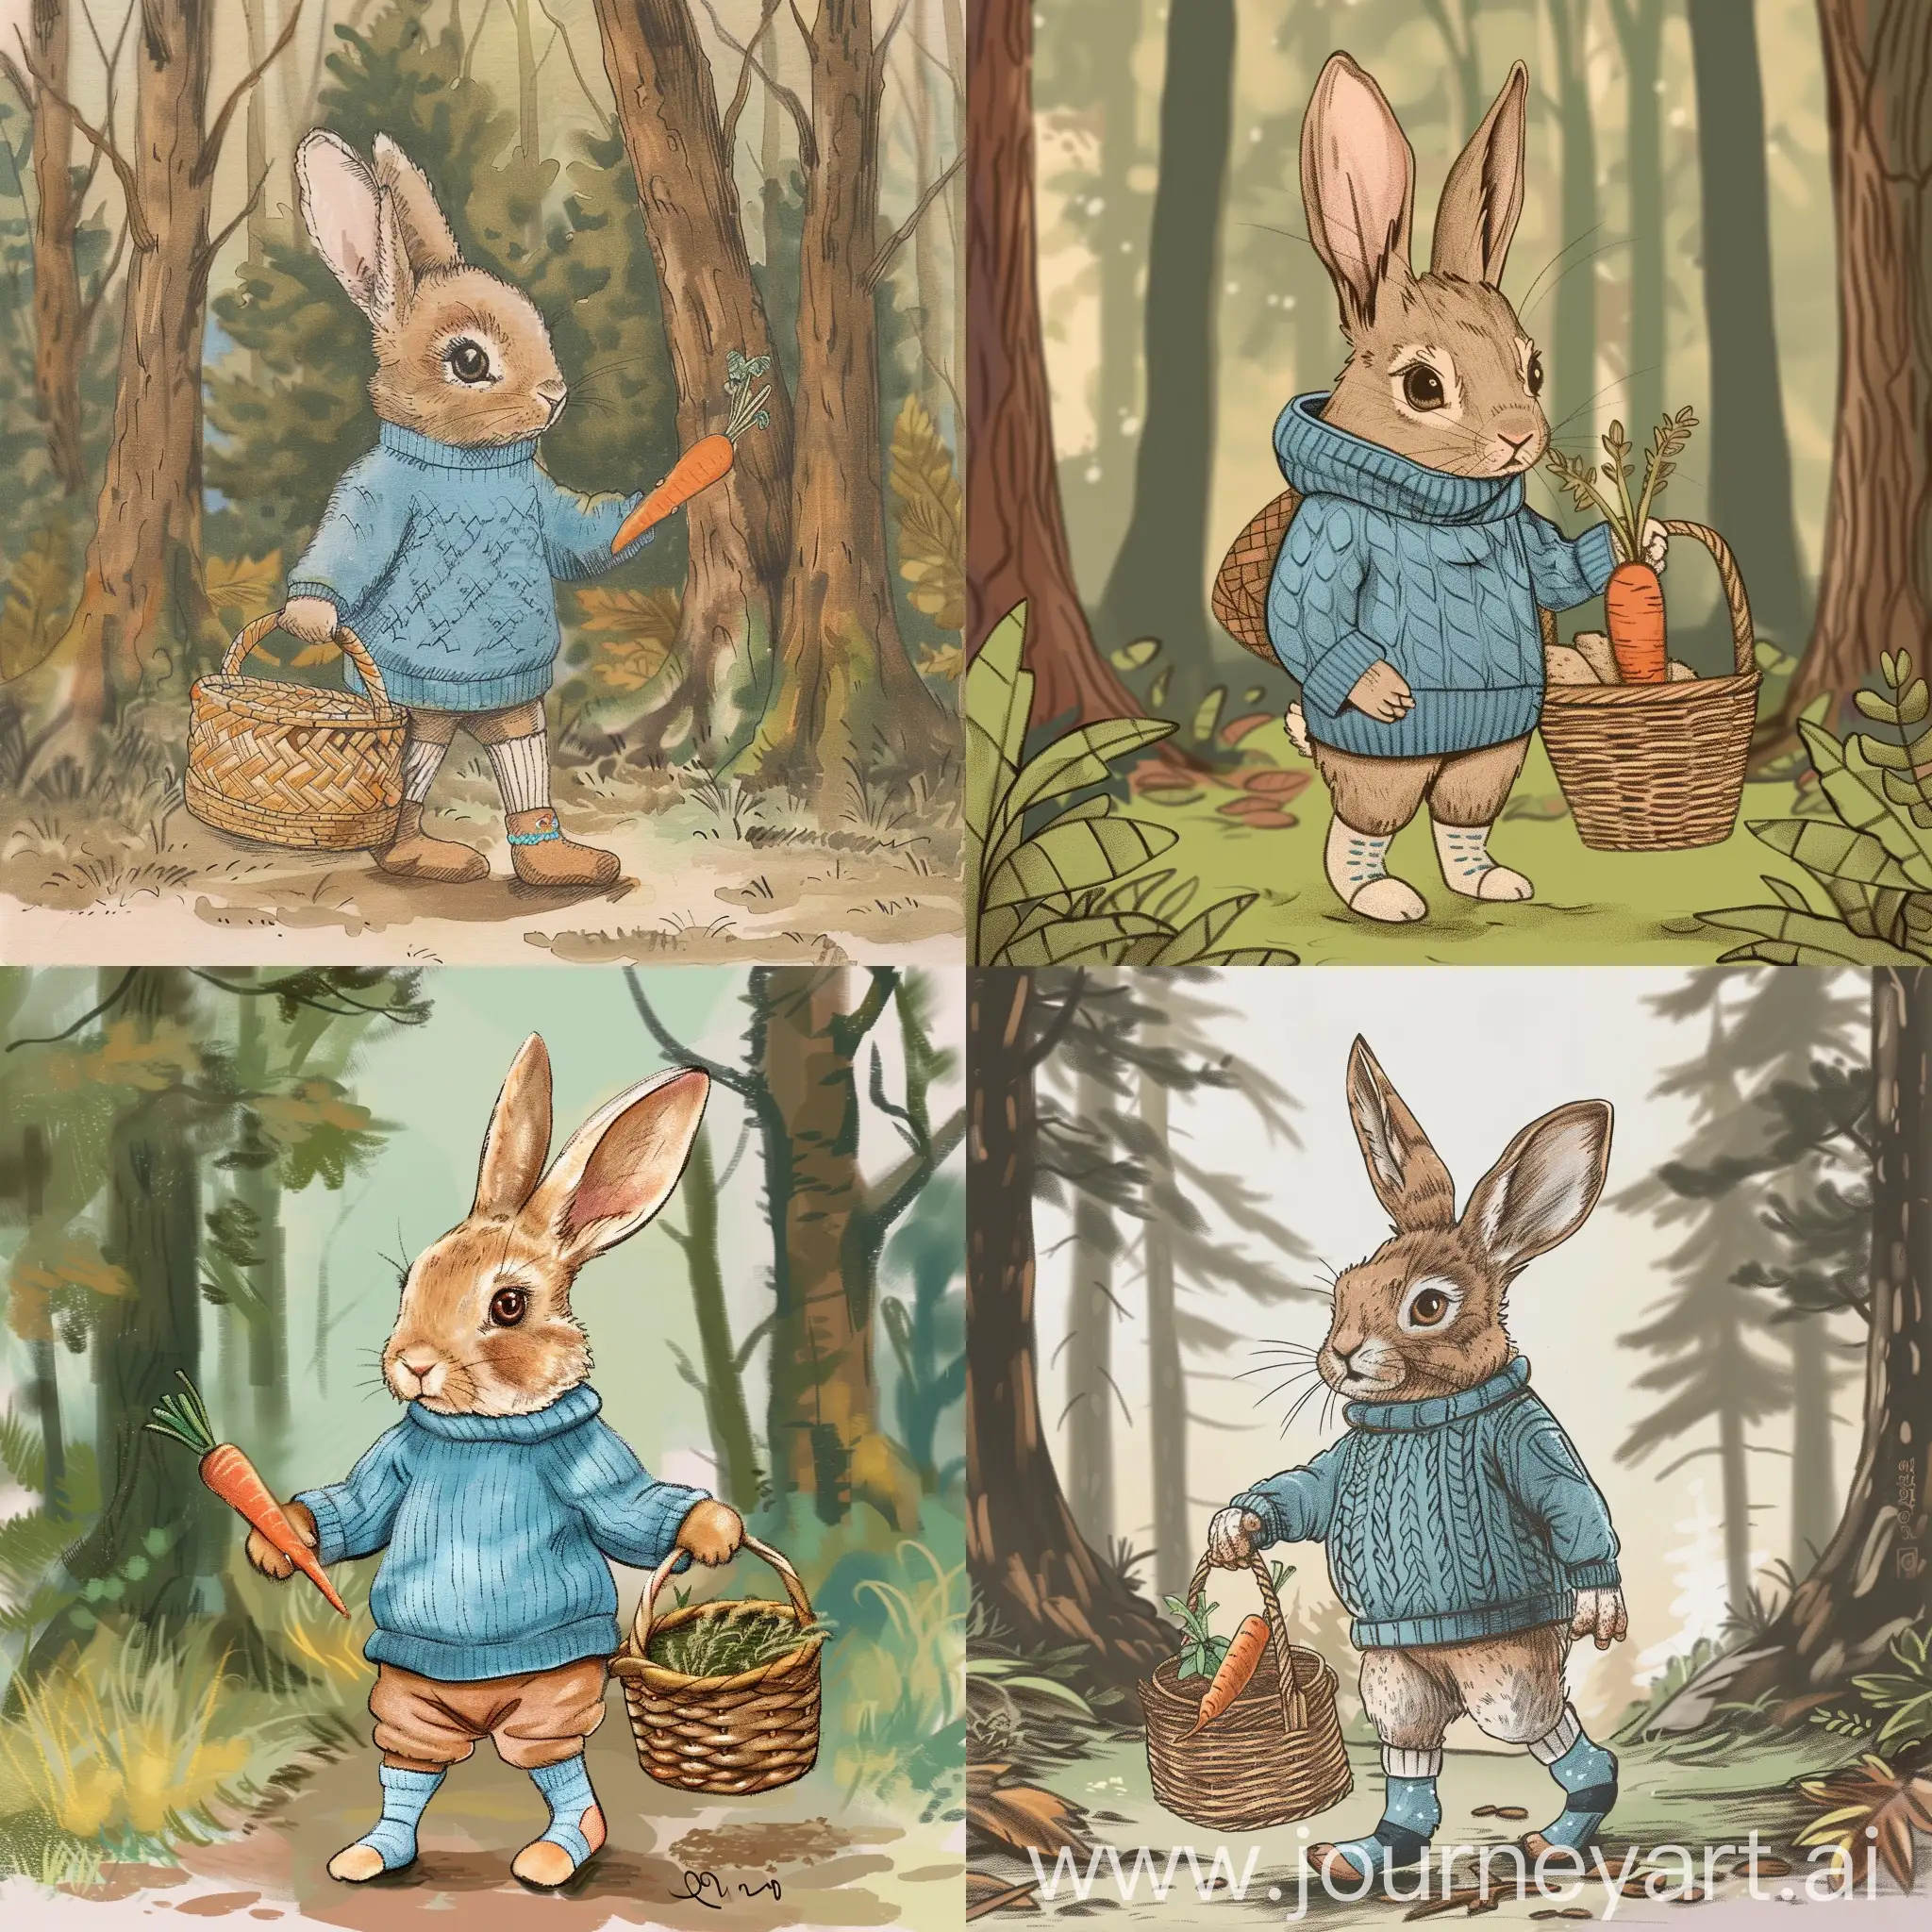 draw a cute rabbit wearing a blue sweater, standing in a forest, carrying a brown woven basket, wear socks, whole body, with a carrot